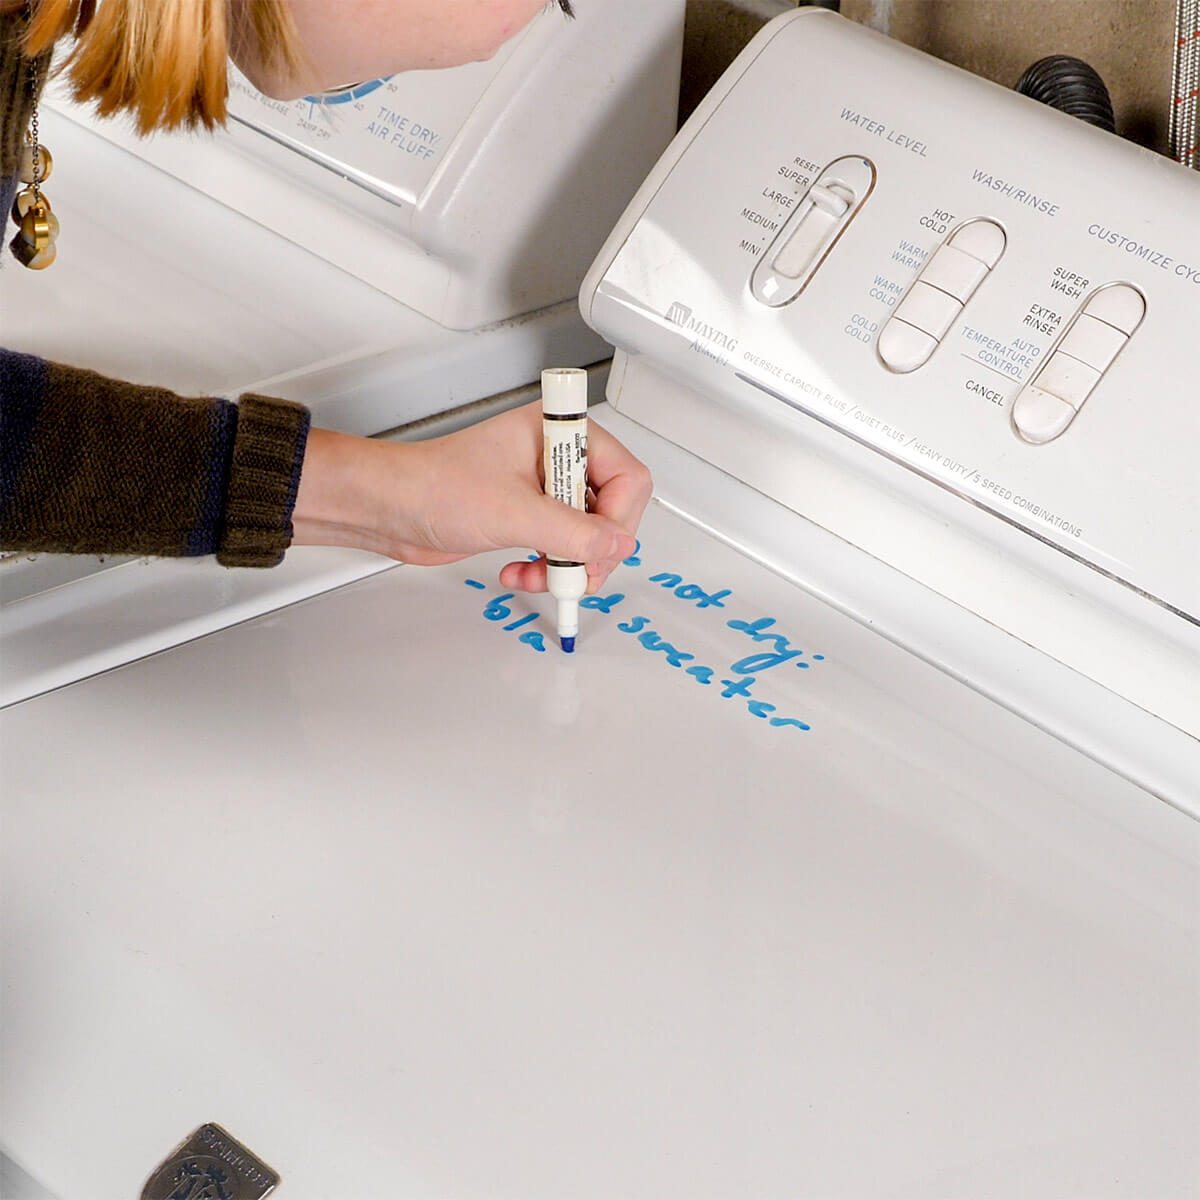 Write Notes on the Washer